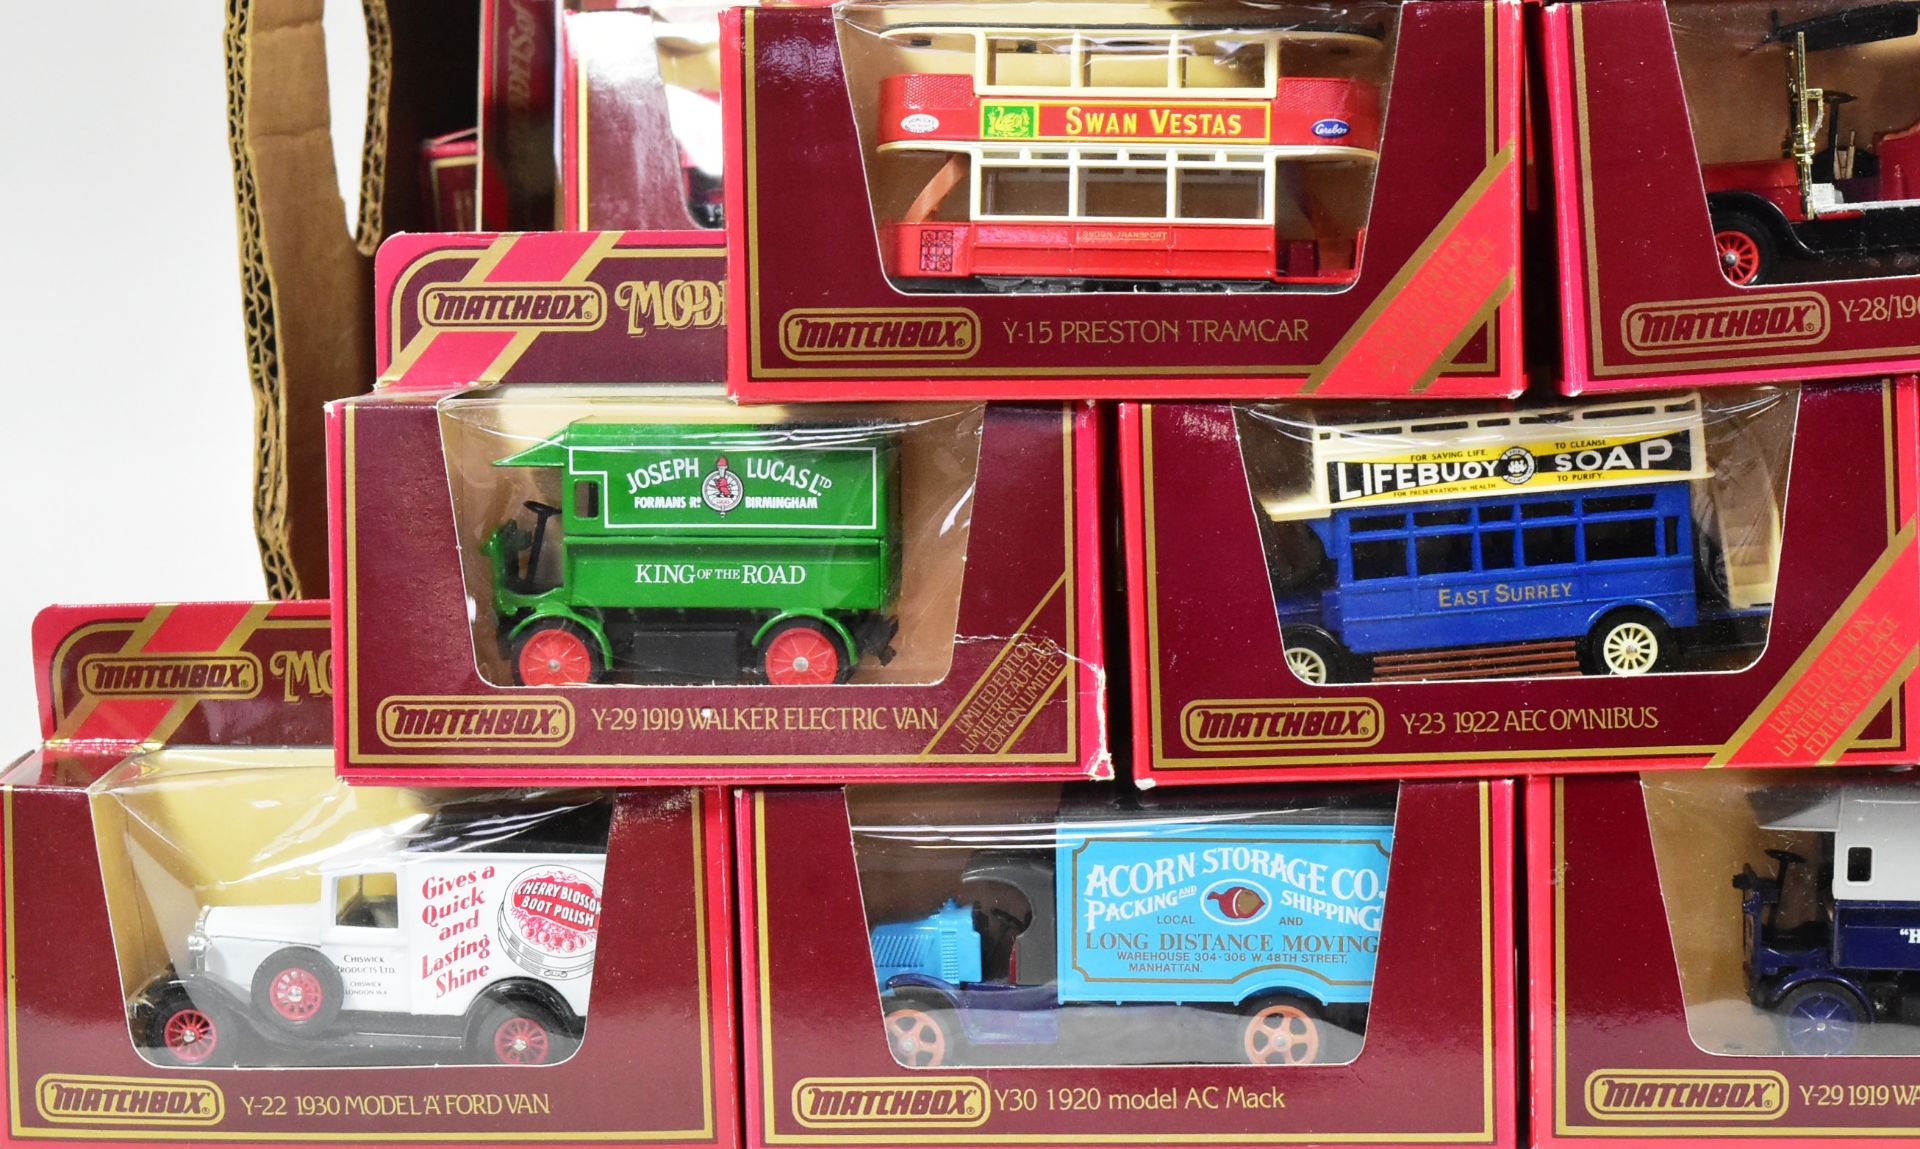 DIECAST - COLLECTION OF MATCHBOX MODELS OF YESTERYEAR - Image 2 of 4